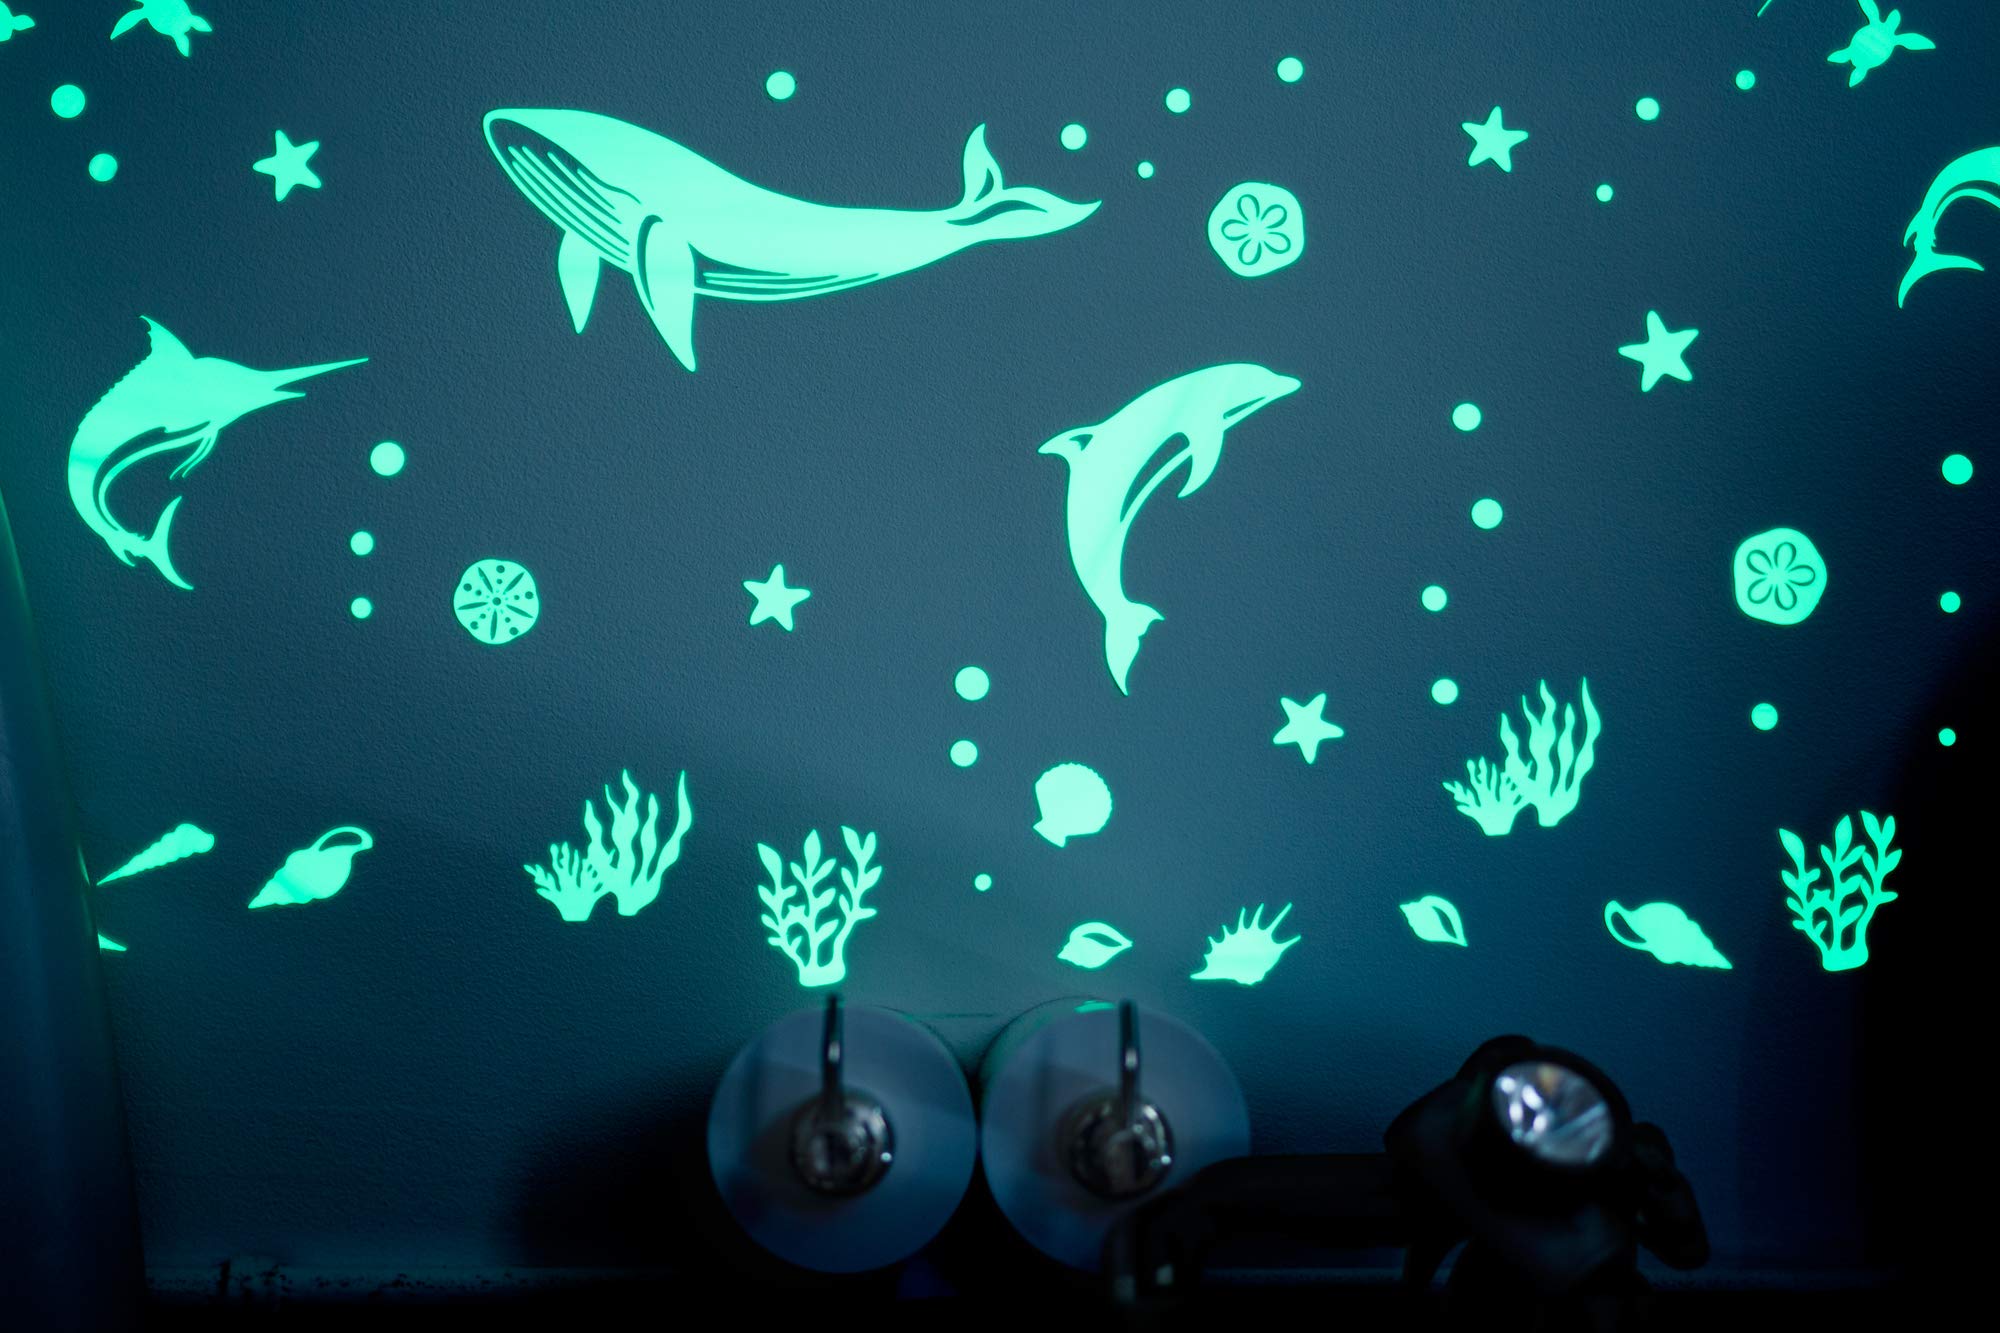 GLOPLAY Sea Animal Series (48pcs/Pack), Glow in The Dark Educational Wall Stickers, The Eco-Friendly and Brightest Wall Stickers for Ceiling, Bathtime, Bedroom, Party, Decor